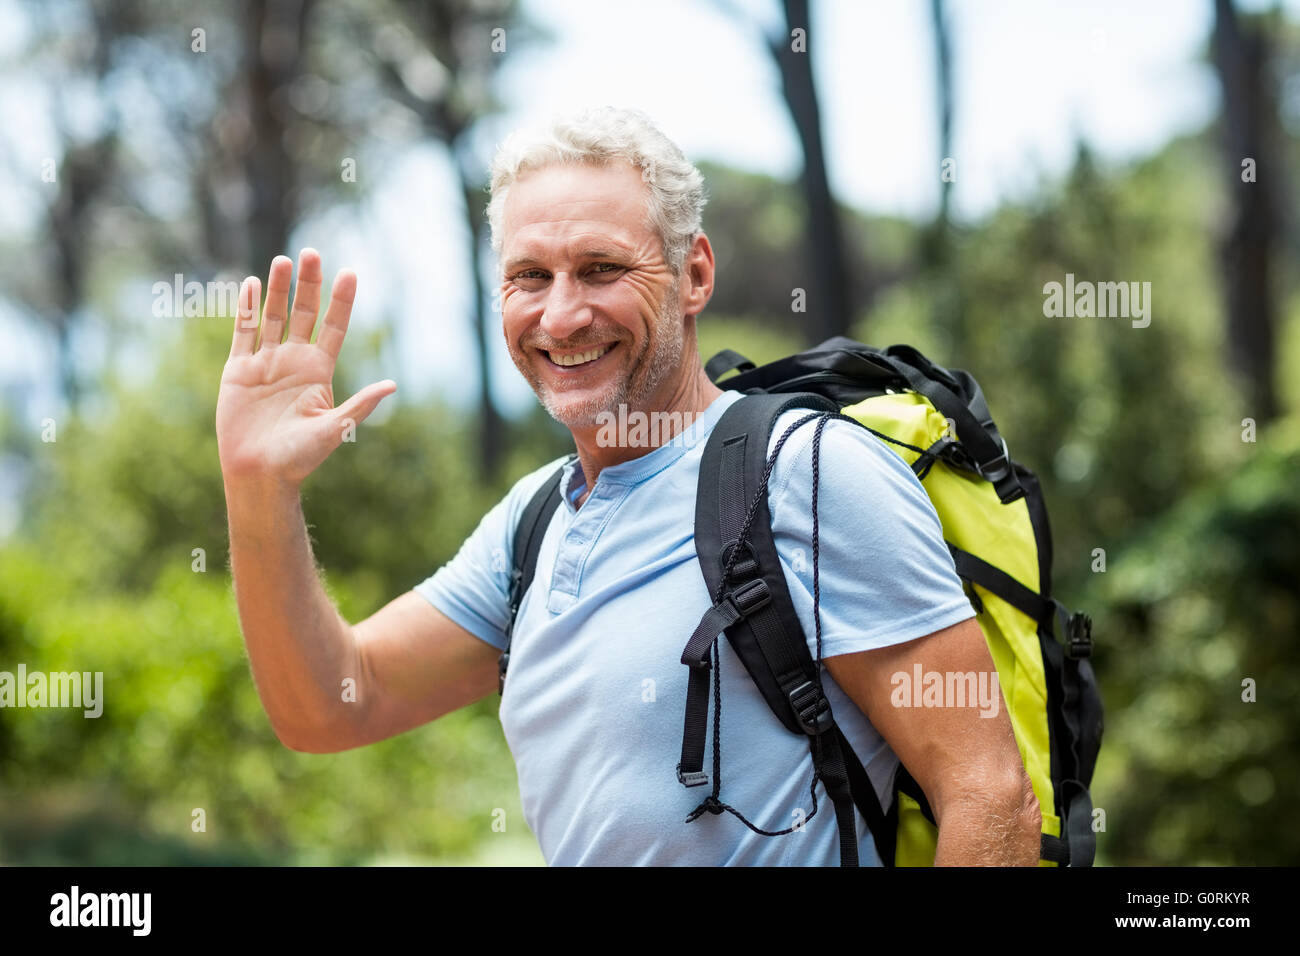 Portrait of a man smiling and greeting Stock Photo